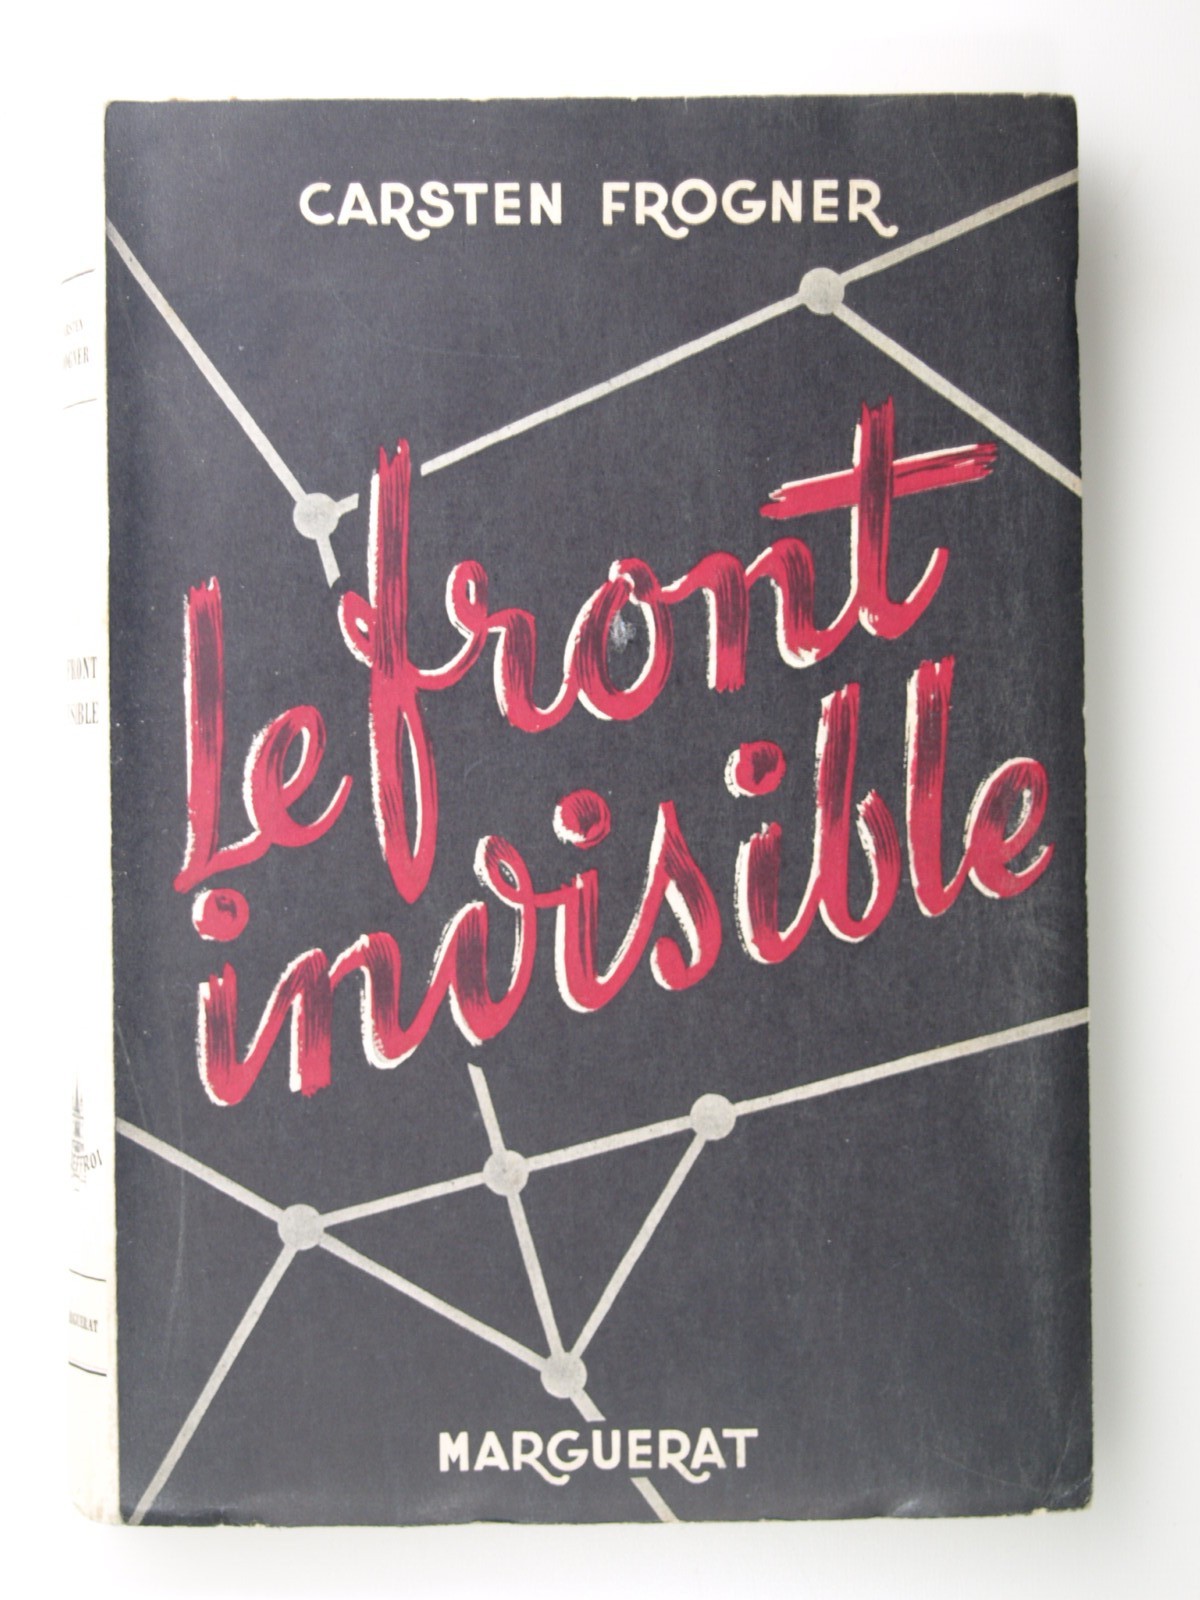 Frogner Carsten : Le front invisible.